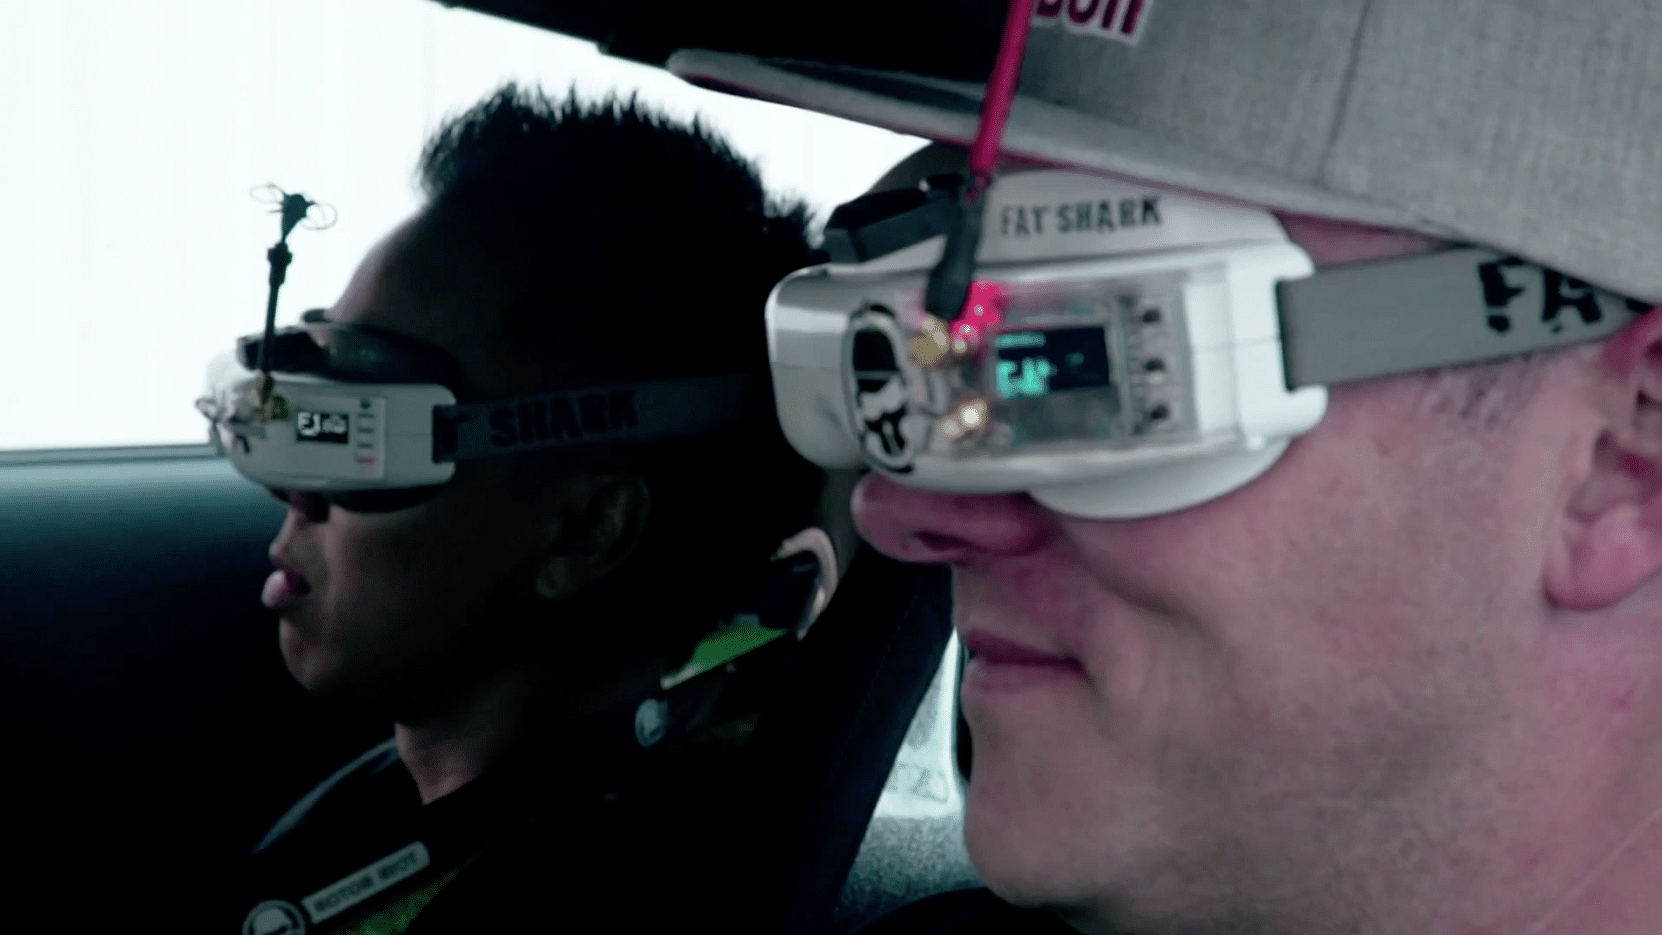 Can anybody drive a car while looking at the road through FPV- glasses